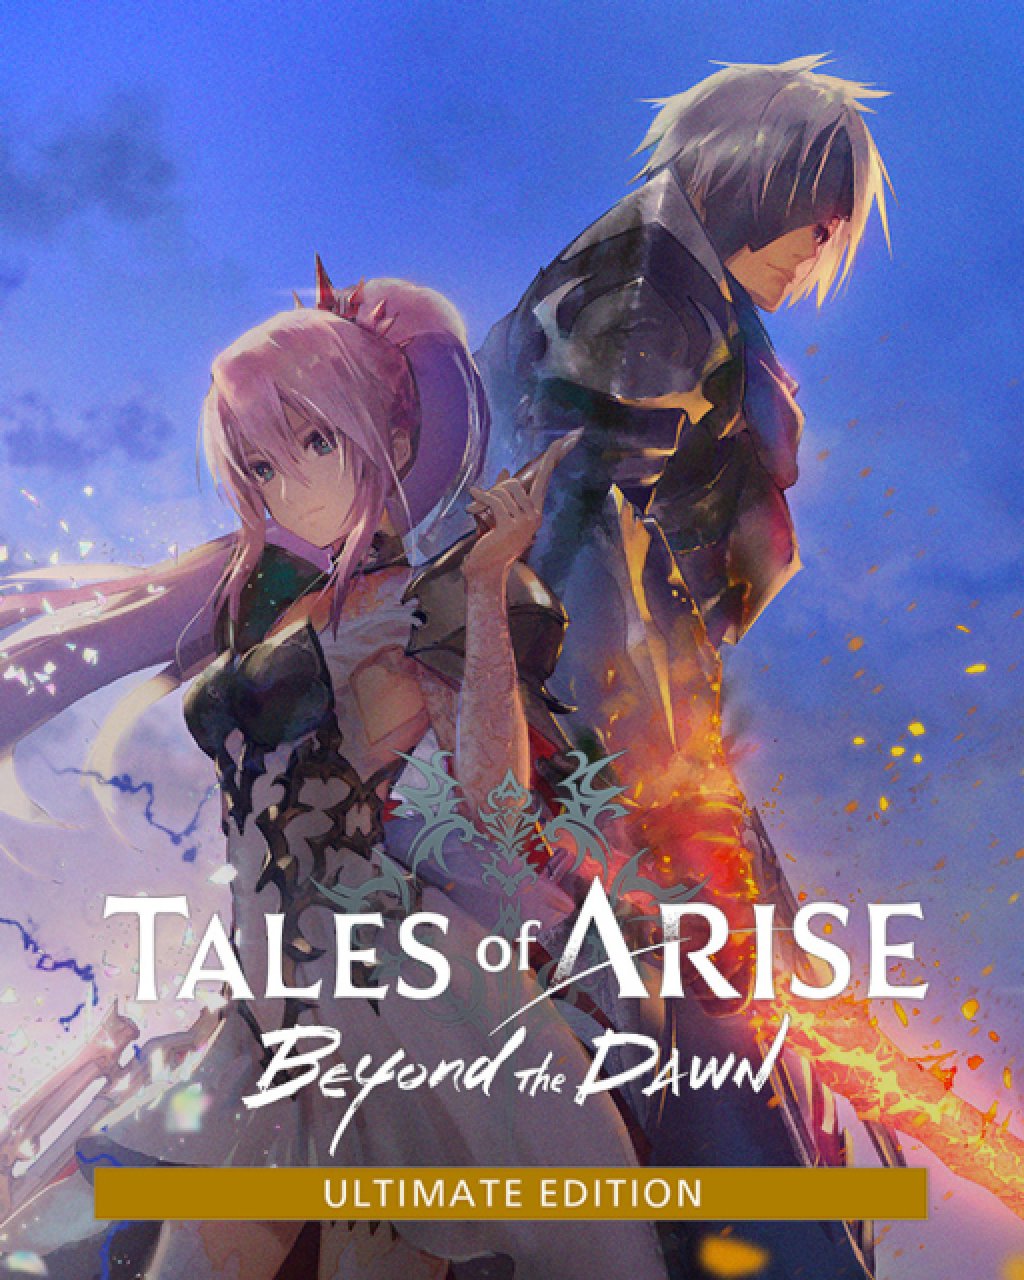 Tales of Arise Beyond the Dawn Ultimate Edition